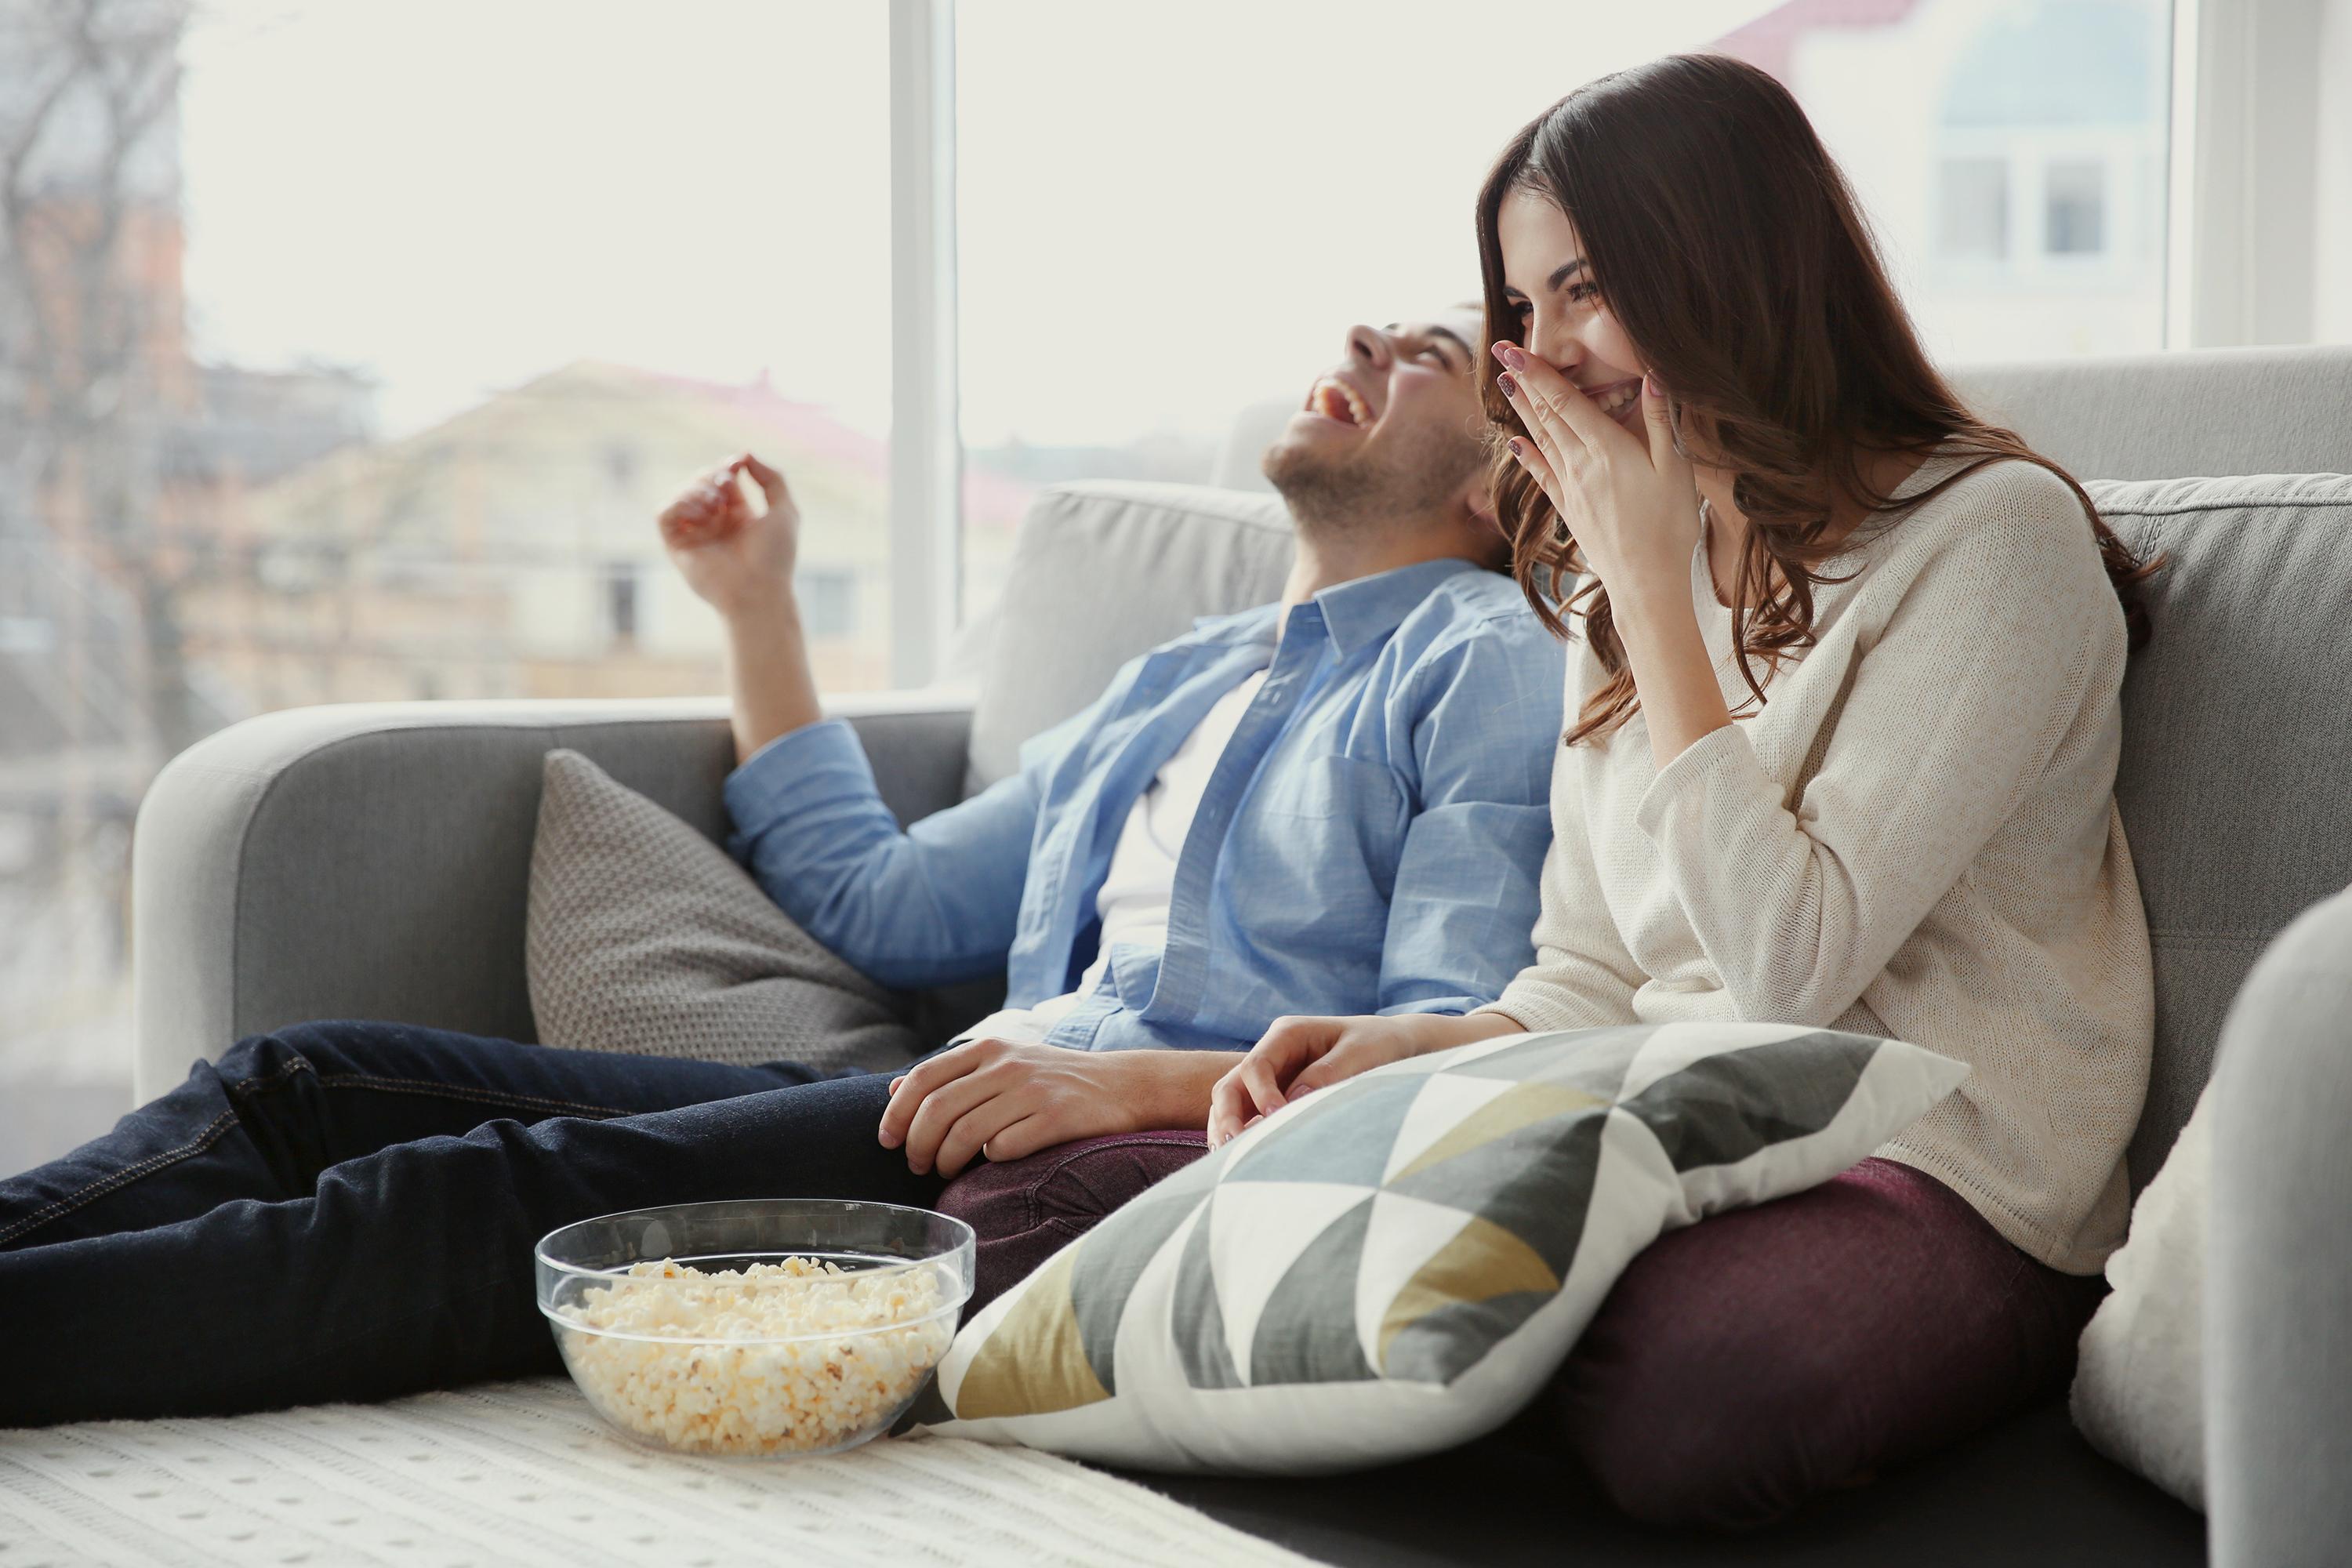 Couple watching TV on sofa in living room while having a snack